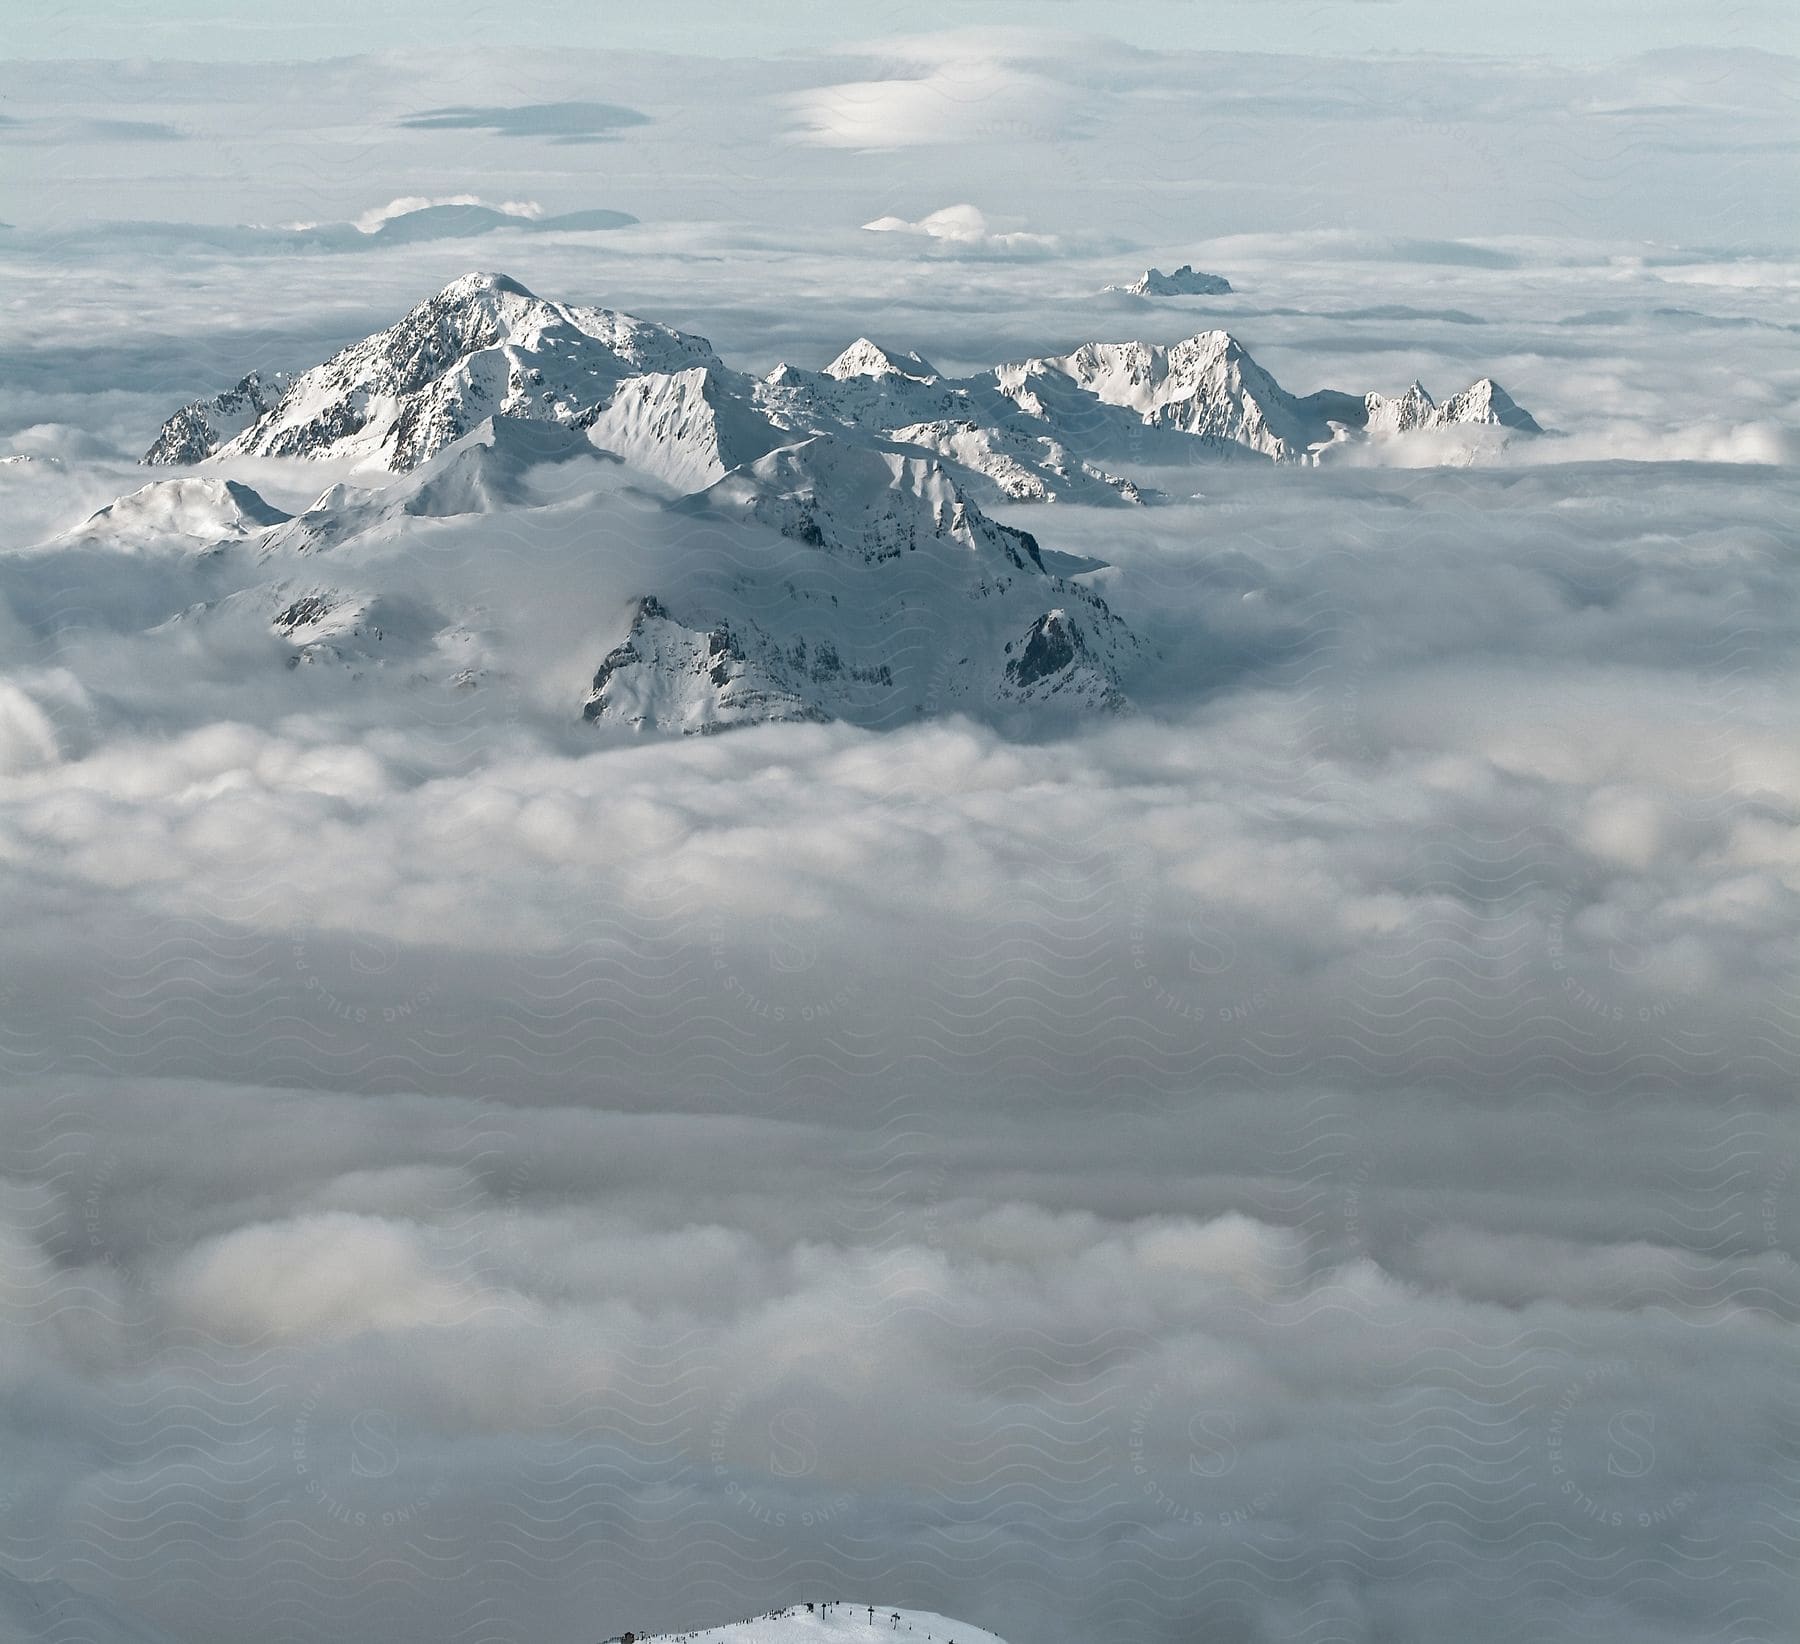 Stock photo of snow-capped mountain peaks emerge from the rolling clouds in the distance